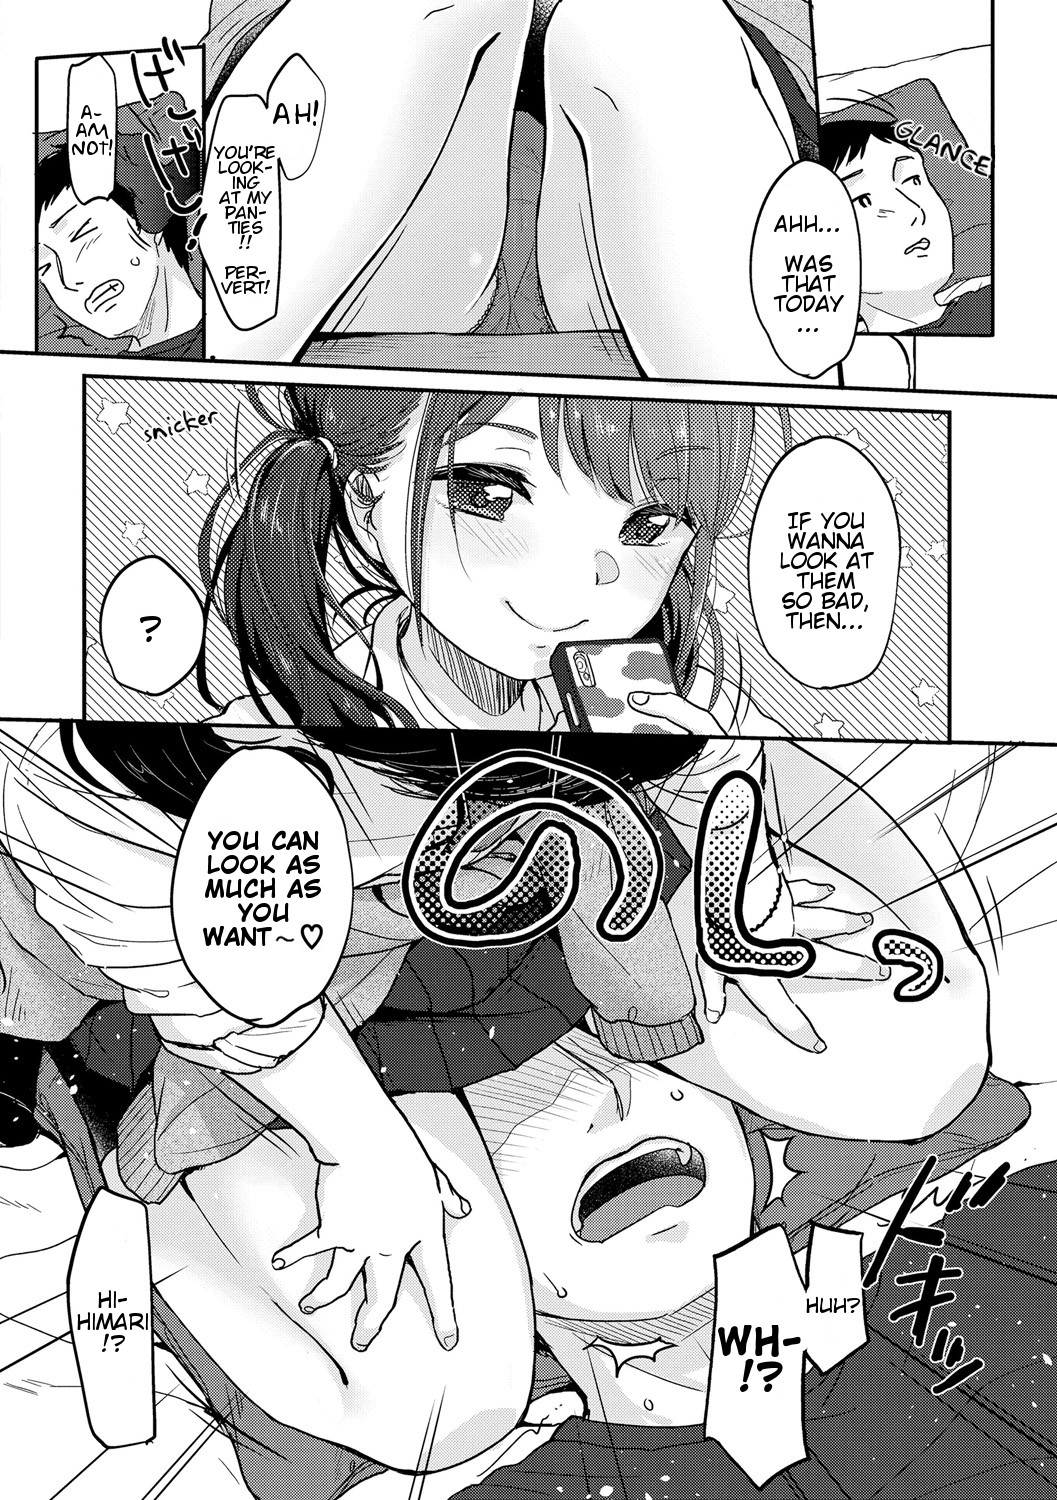 Hentai Manga Comic-Thighs Are But a Dream + Extra-Read-2